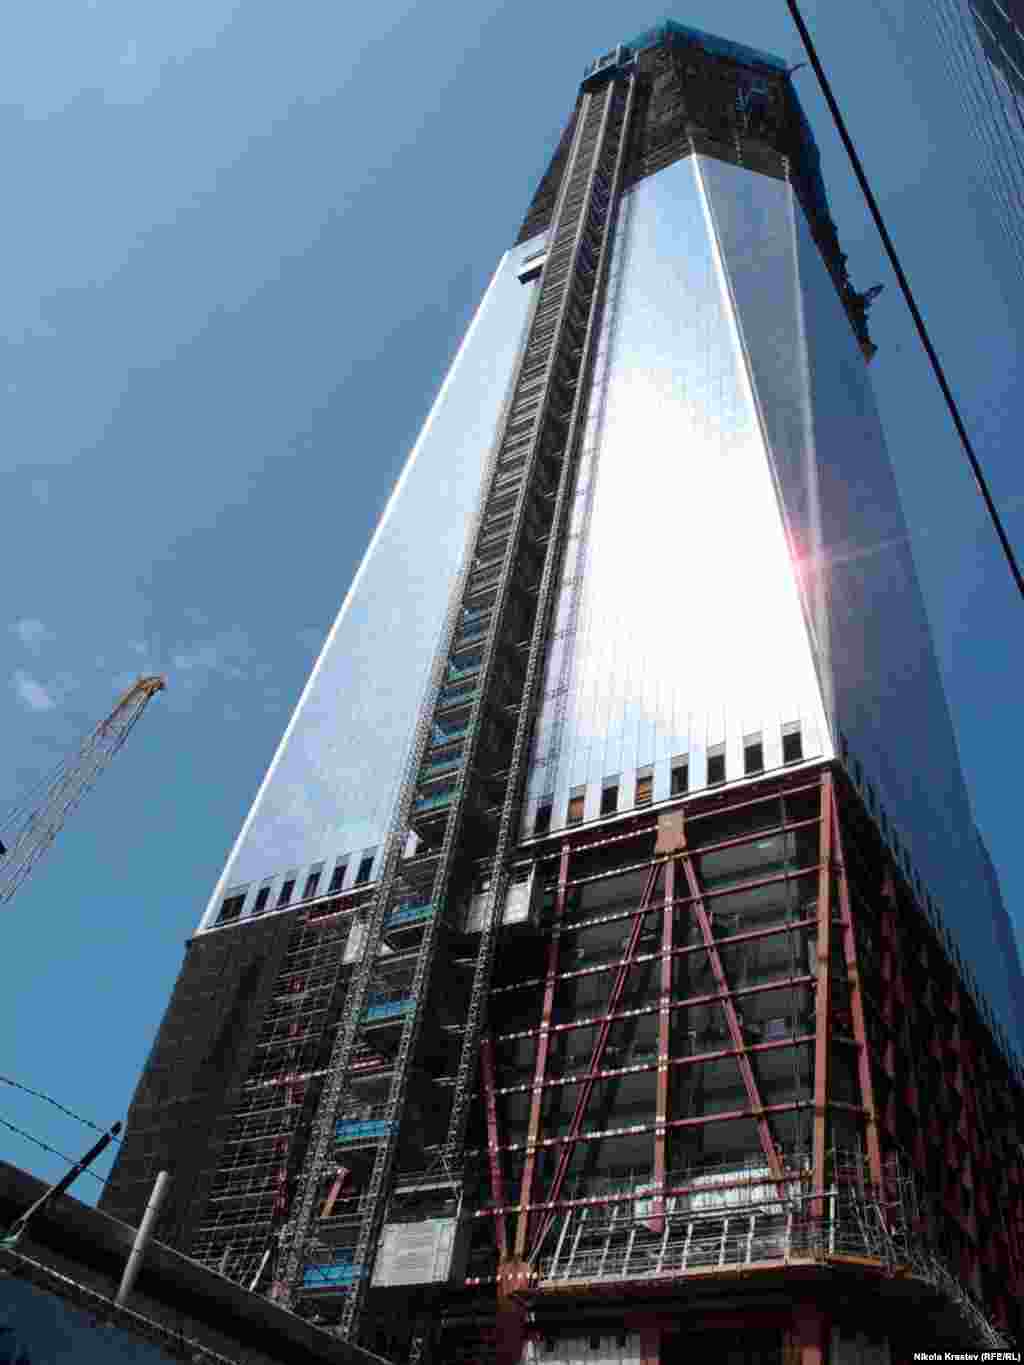 The unfinished Freedom Tower, also called 1 World Trade Center, is the flagship of the new business complex. 